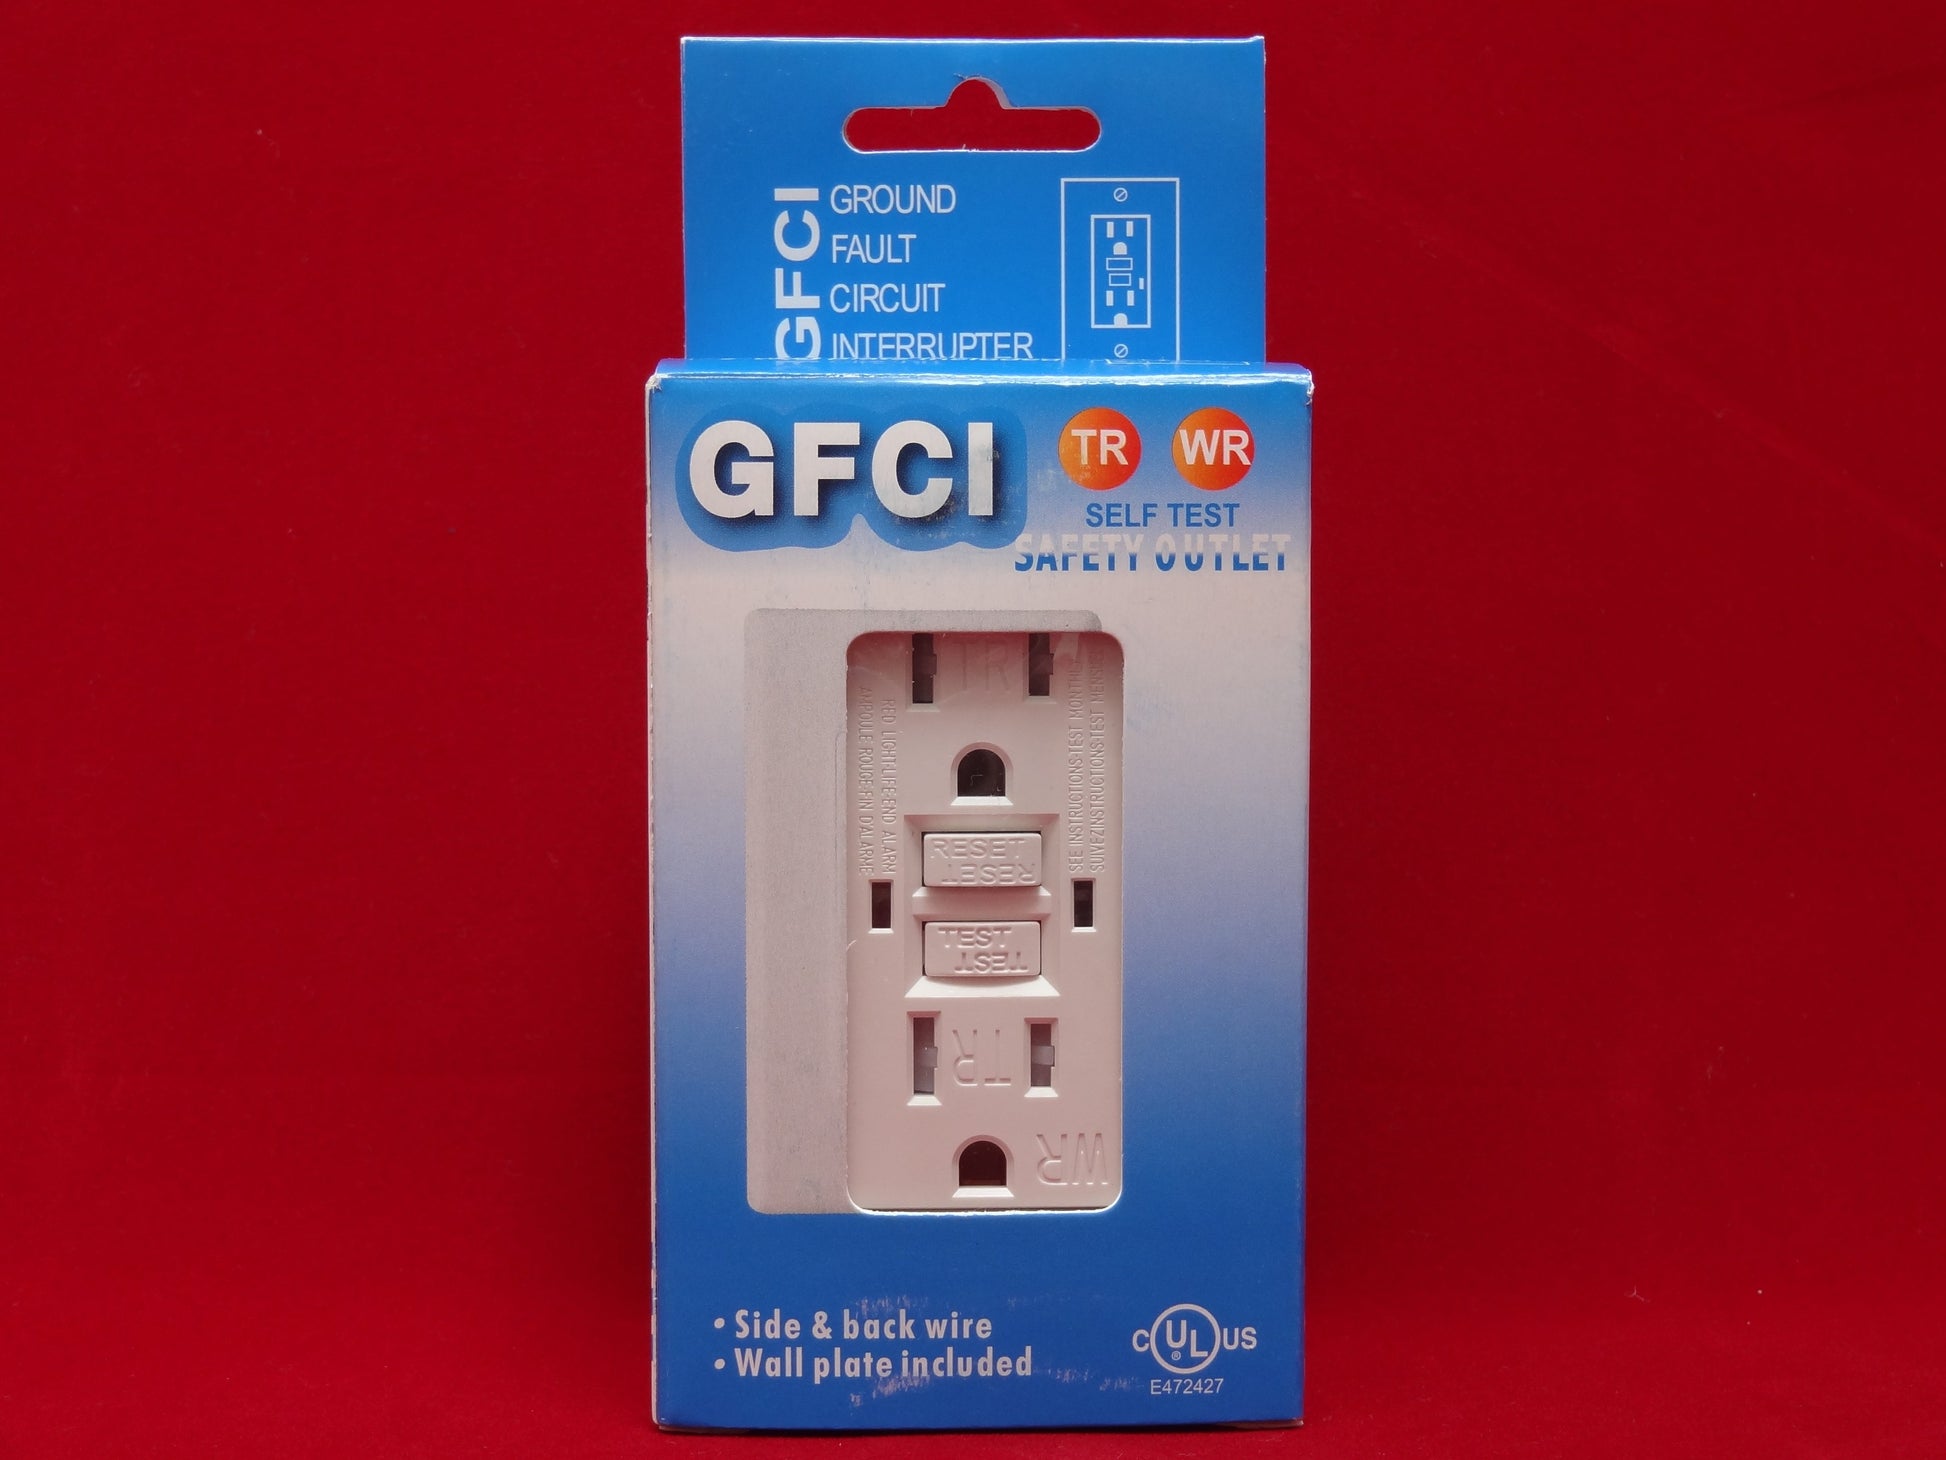 Outside GFCI Outlets: Canada 15amp 6pack Weather Resistant Receptacle WR TR - Led Light Canada